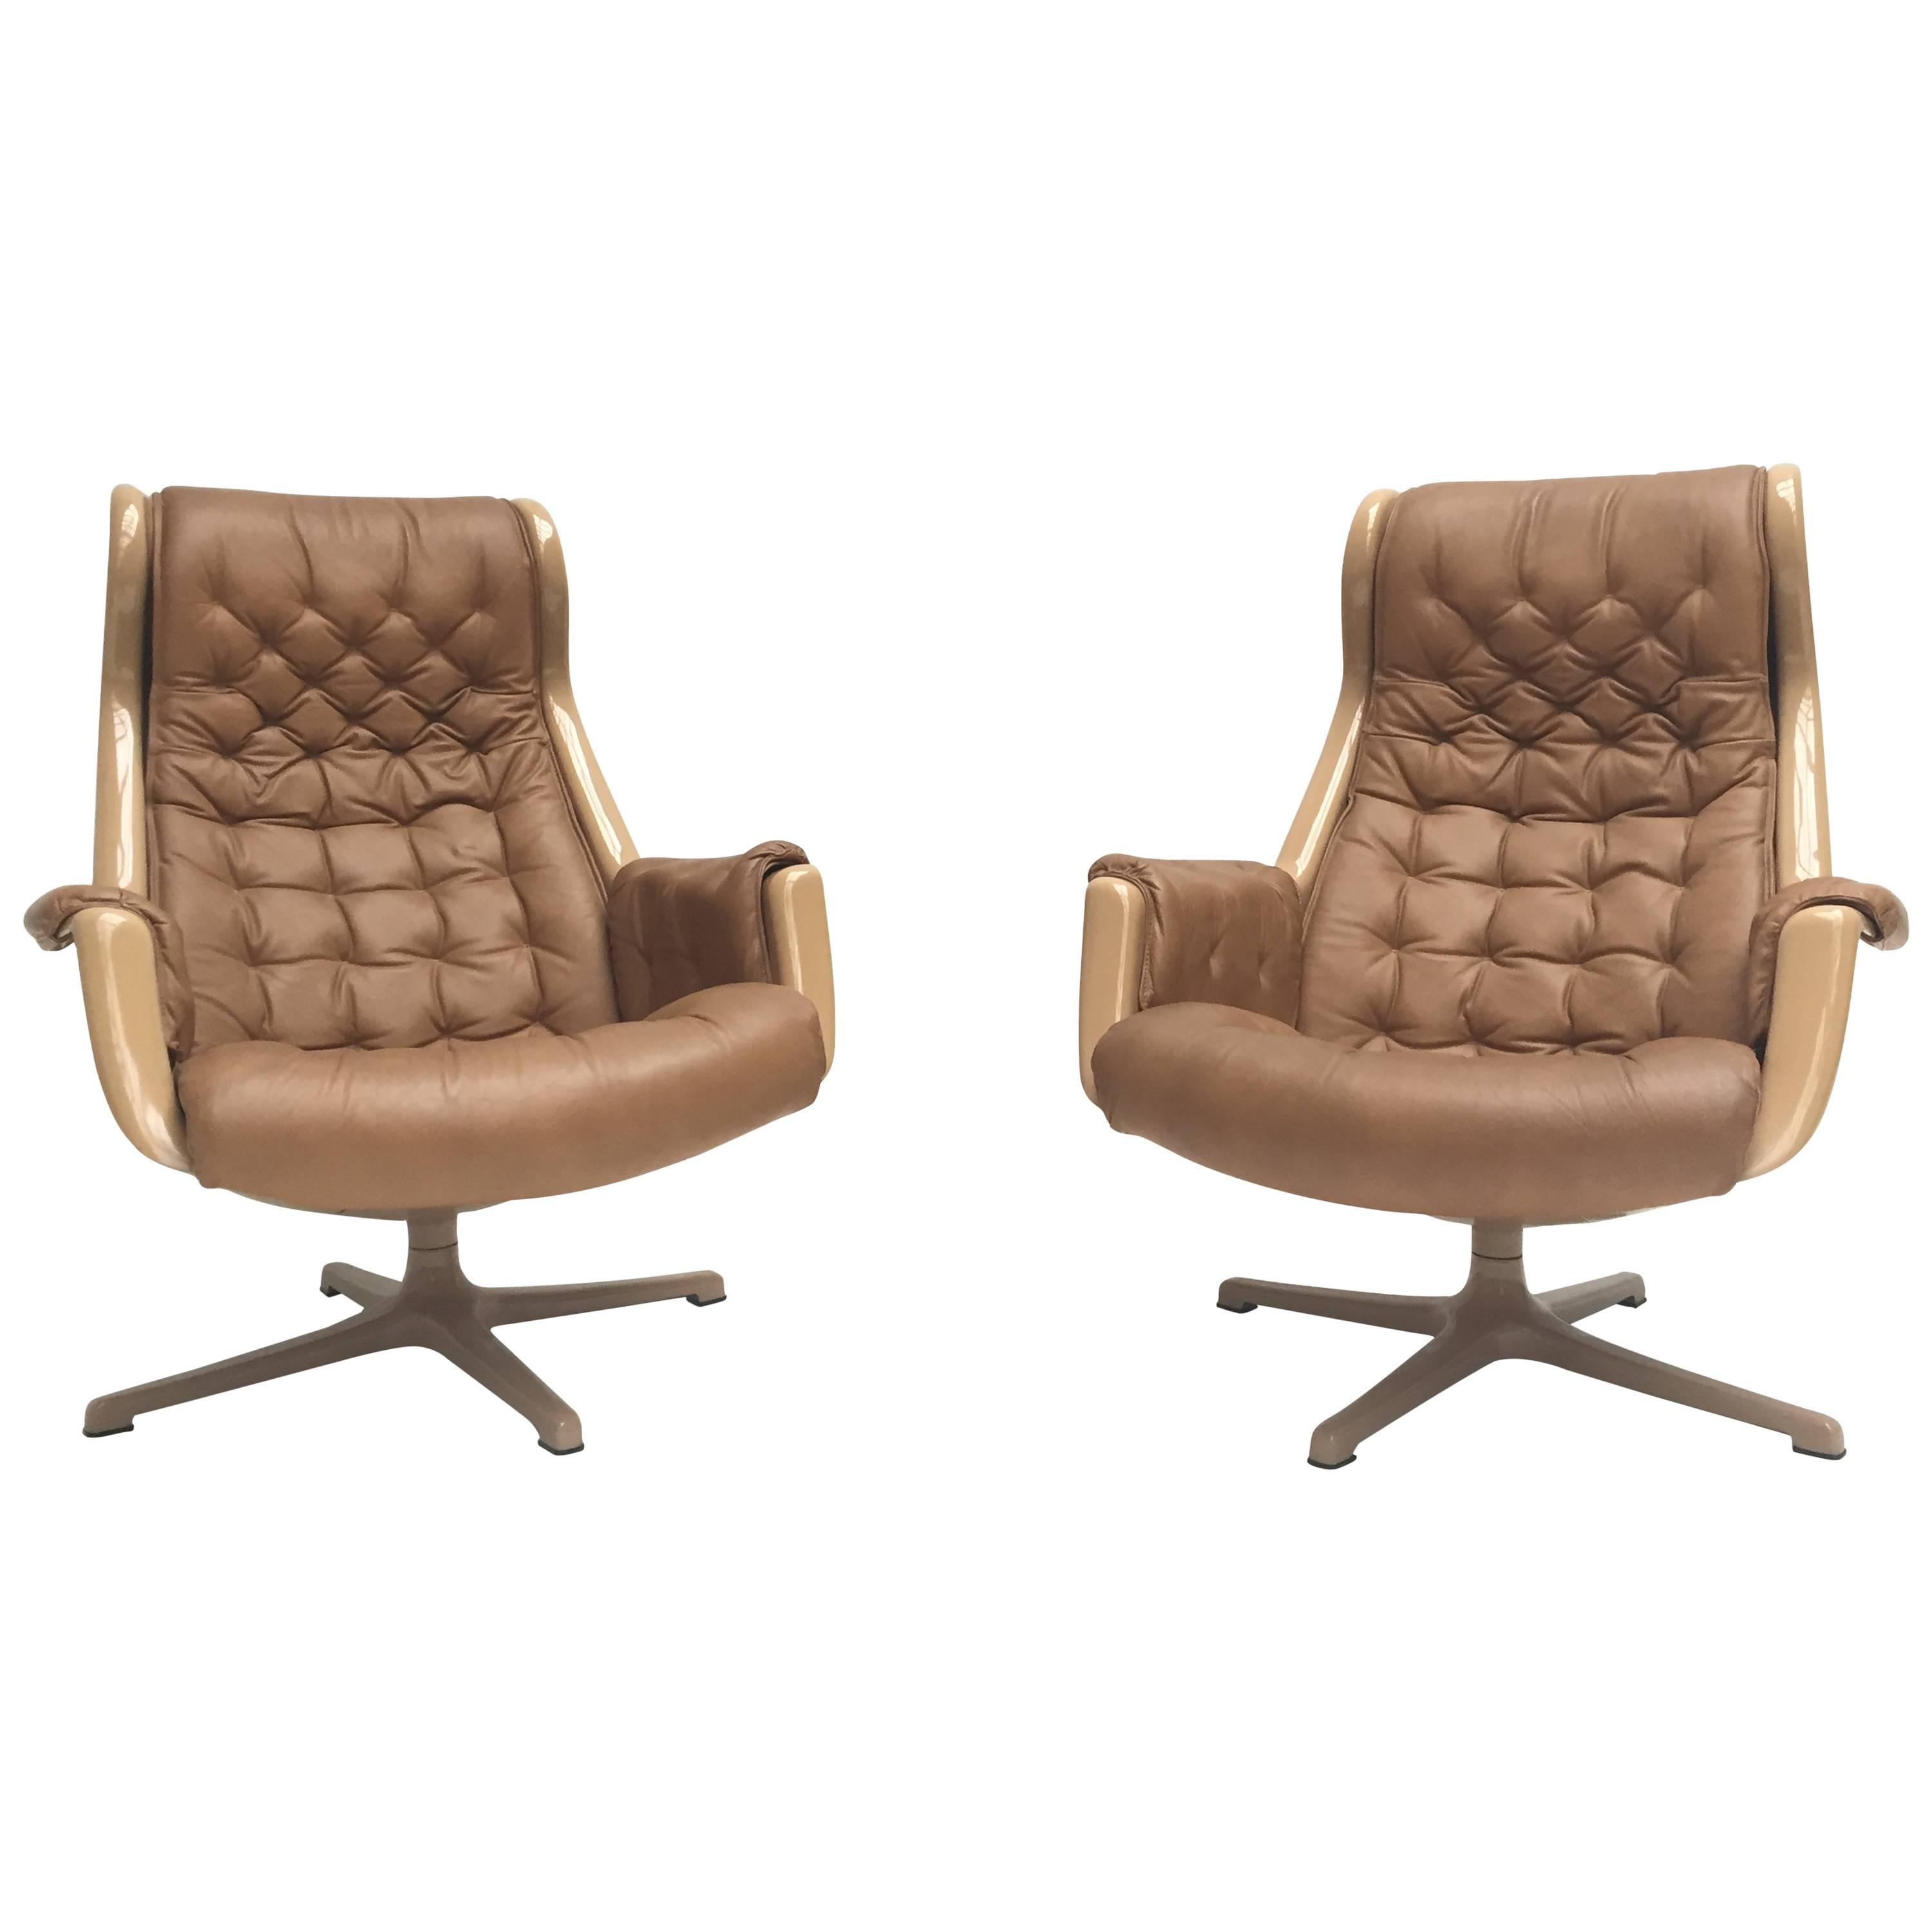 Pair of "Galaxy" Easy Chairs by Alf Svensson & Ingvar Sandstrom for DUX Sweden